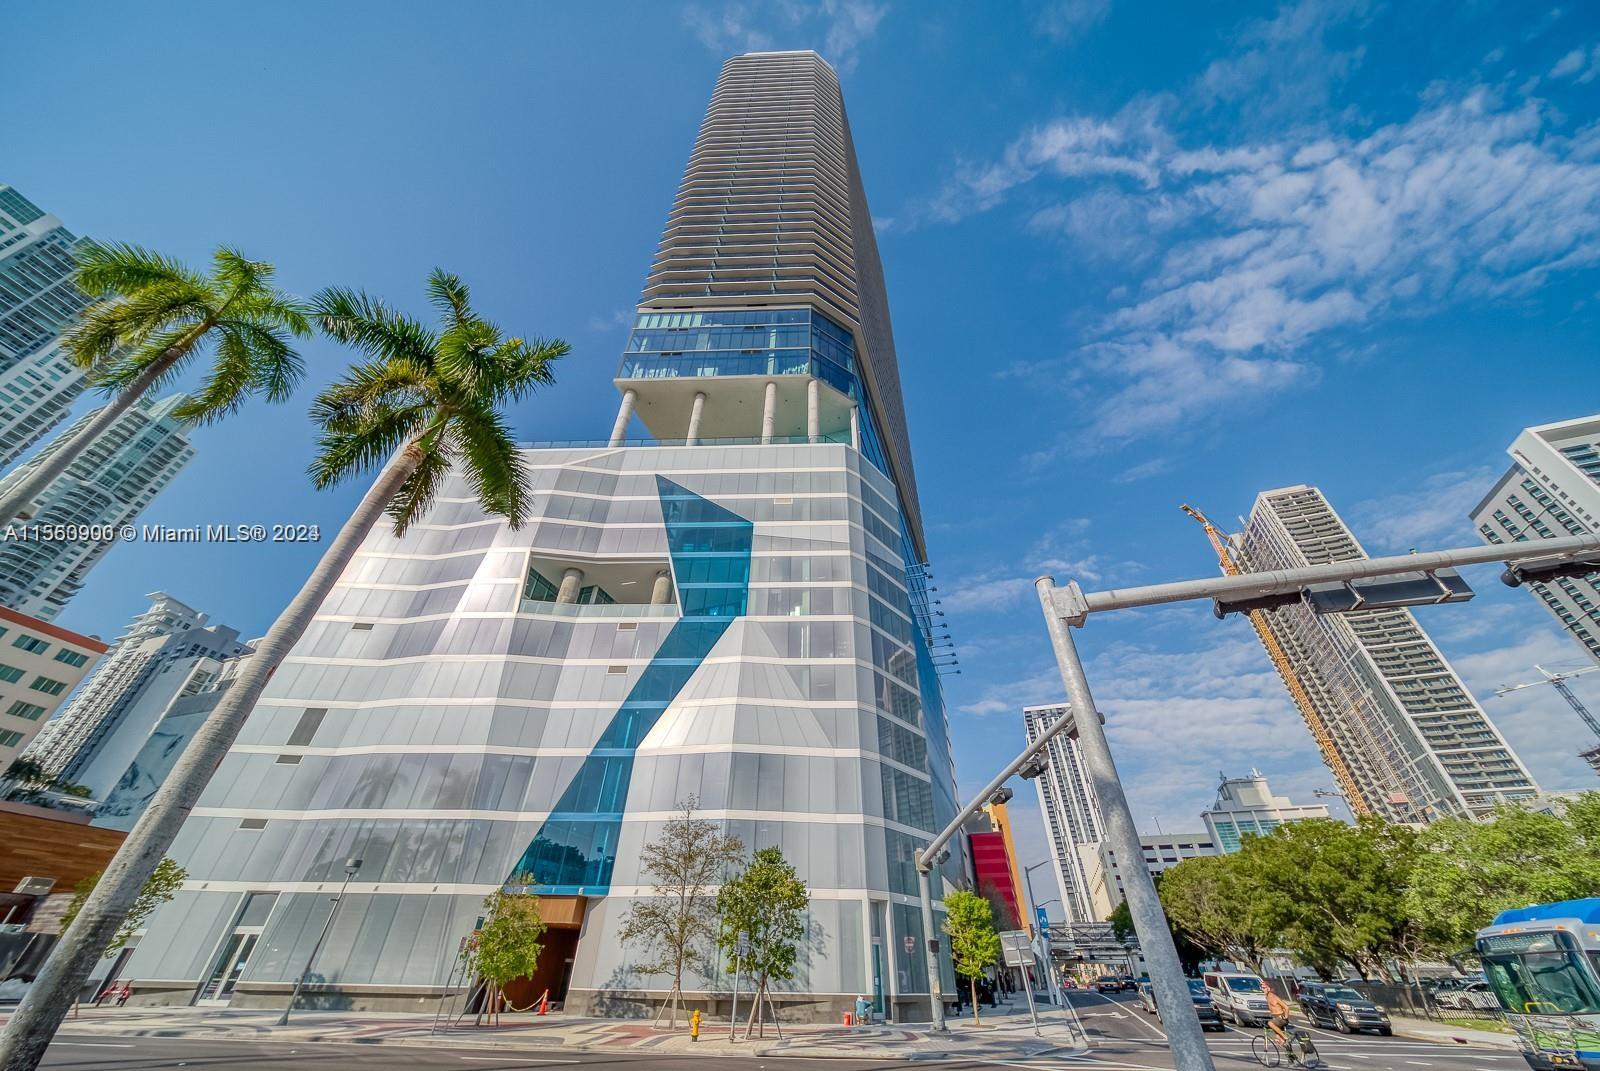 THE ELSER Hotel & Residences. BRAND NEW!  OCEAN view unit excellent location in the heart of Downtown Miami. Italian kitchen, quartz counter, Fully furnished & equipment, Resort style amenities, Co working spaces, Sky entertainment Lounge & more to discover. Ready to move to enjoy a Miami lifestyle